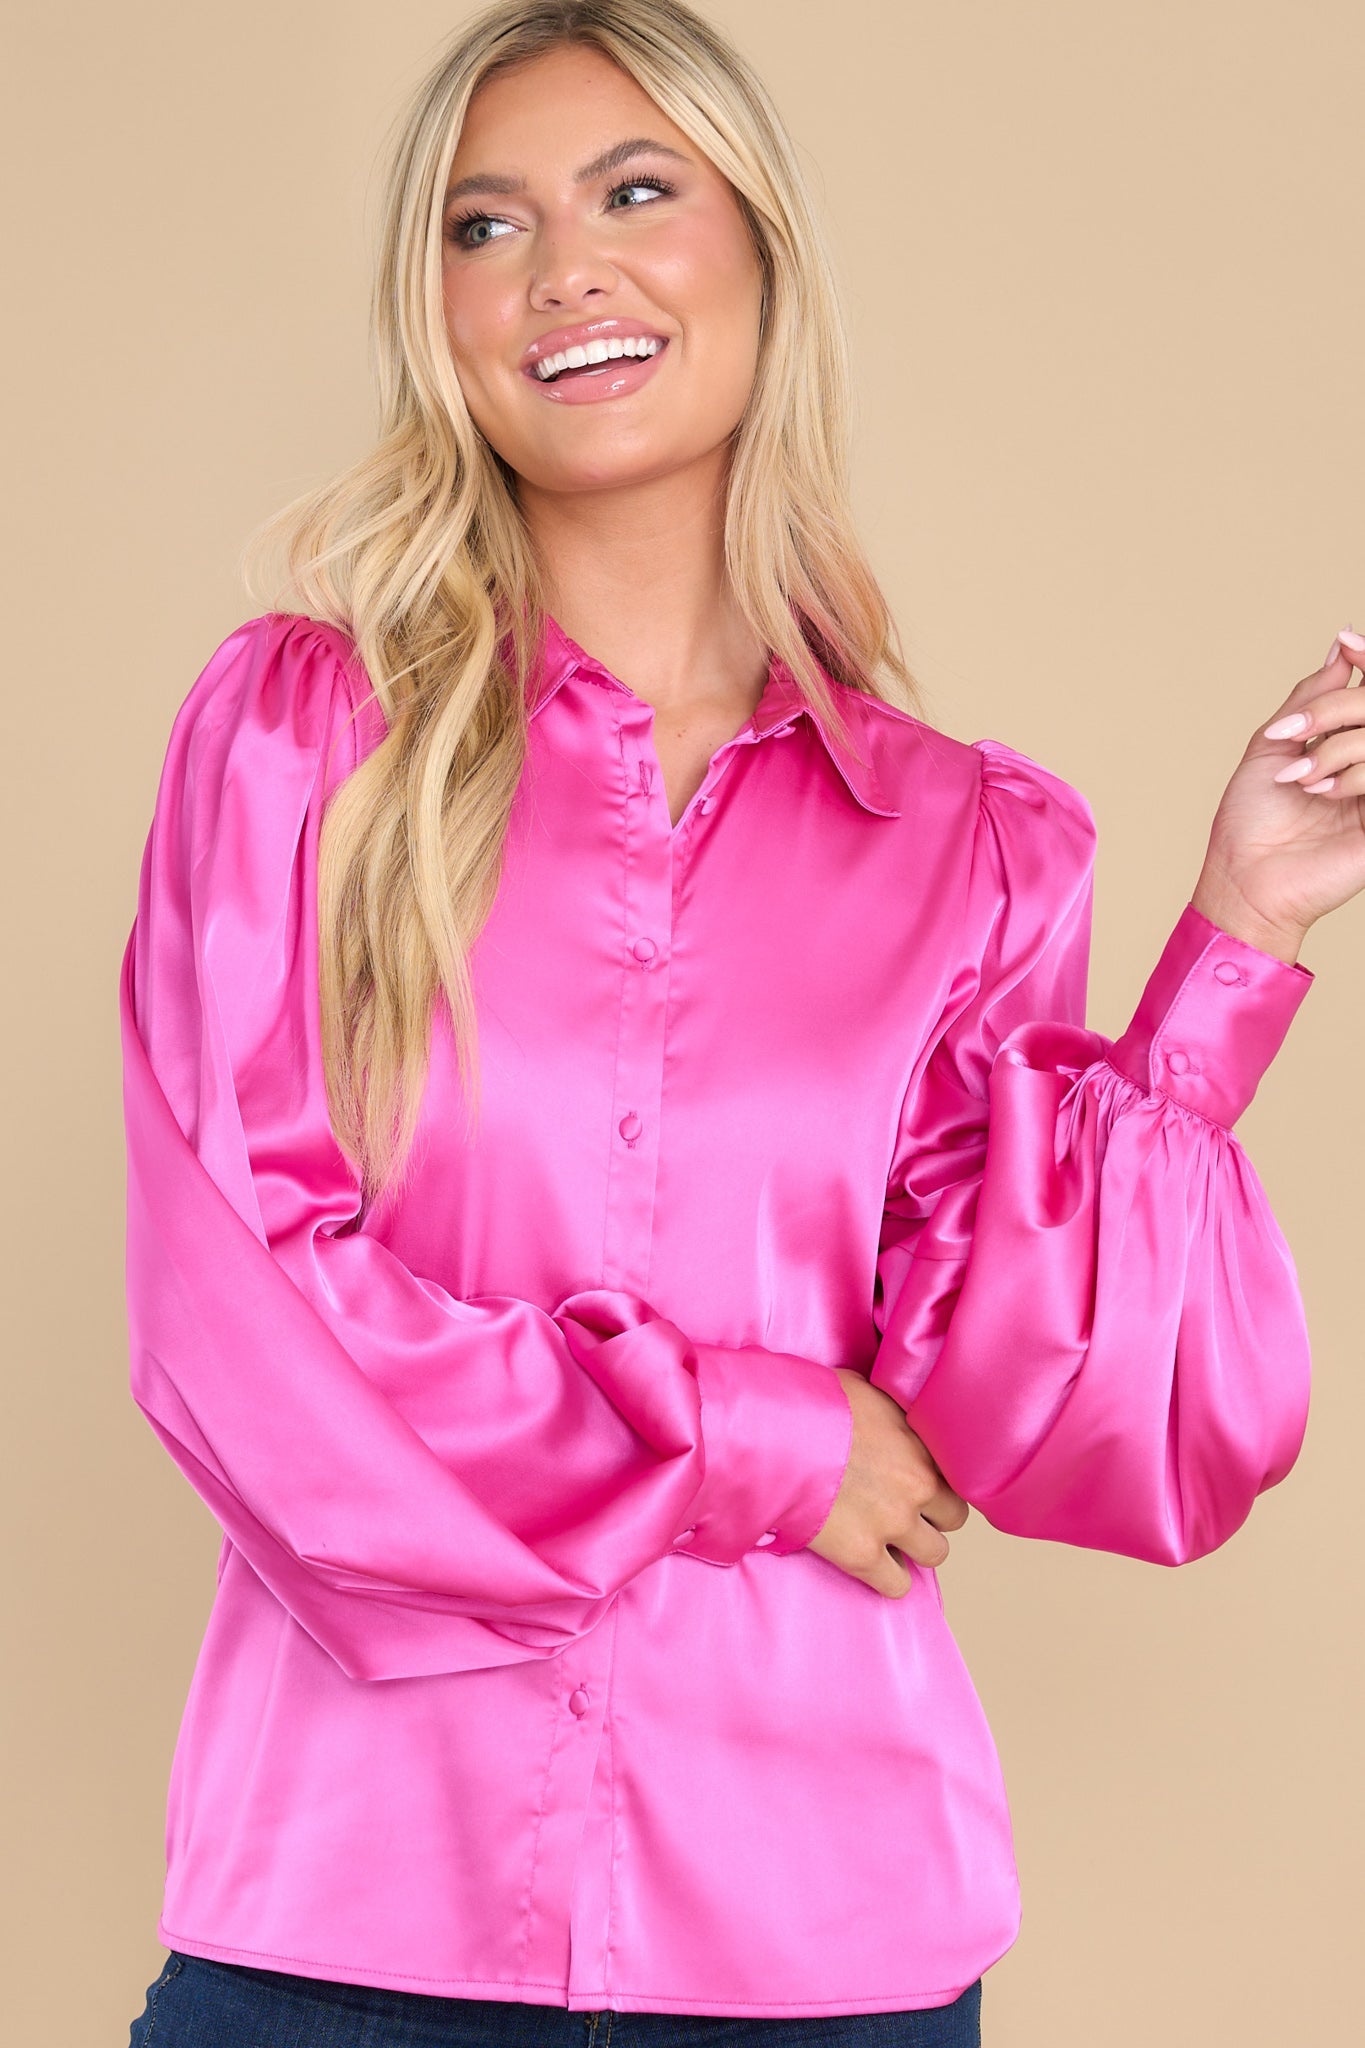 Blessed Events Hot Pink Top - Red Dress